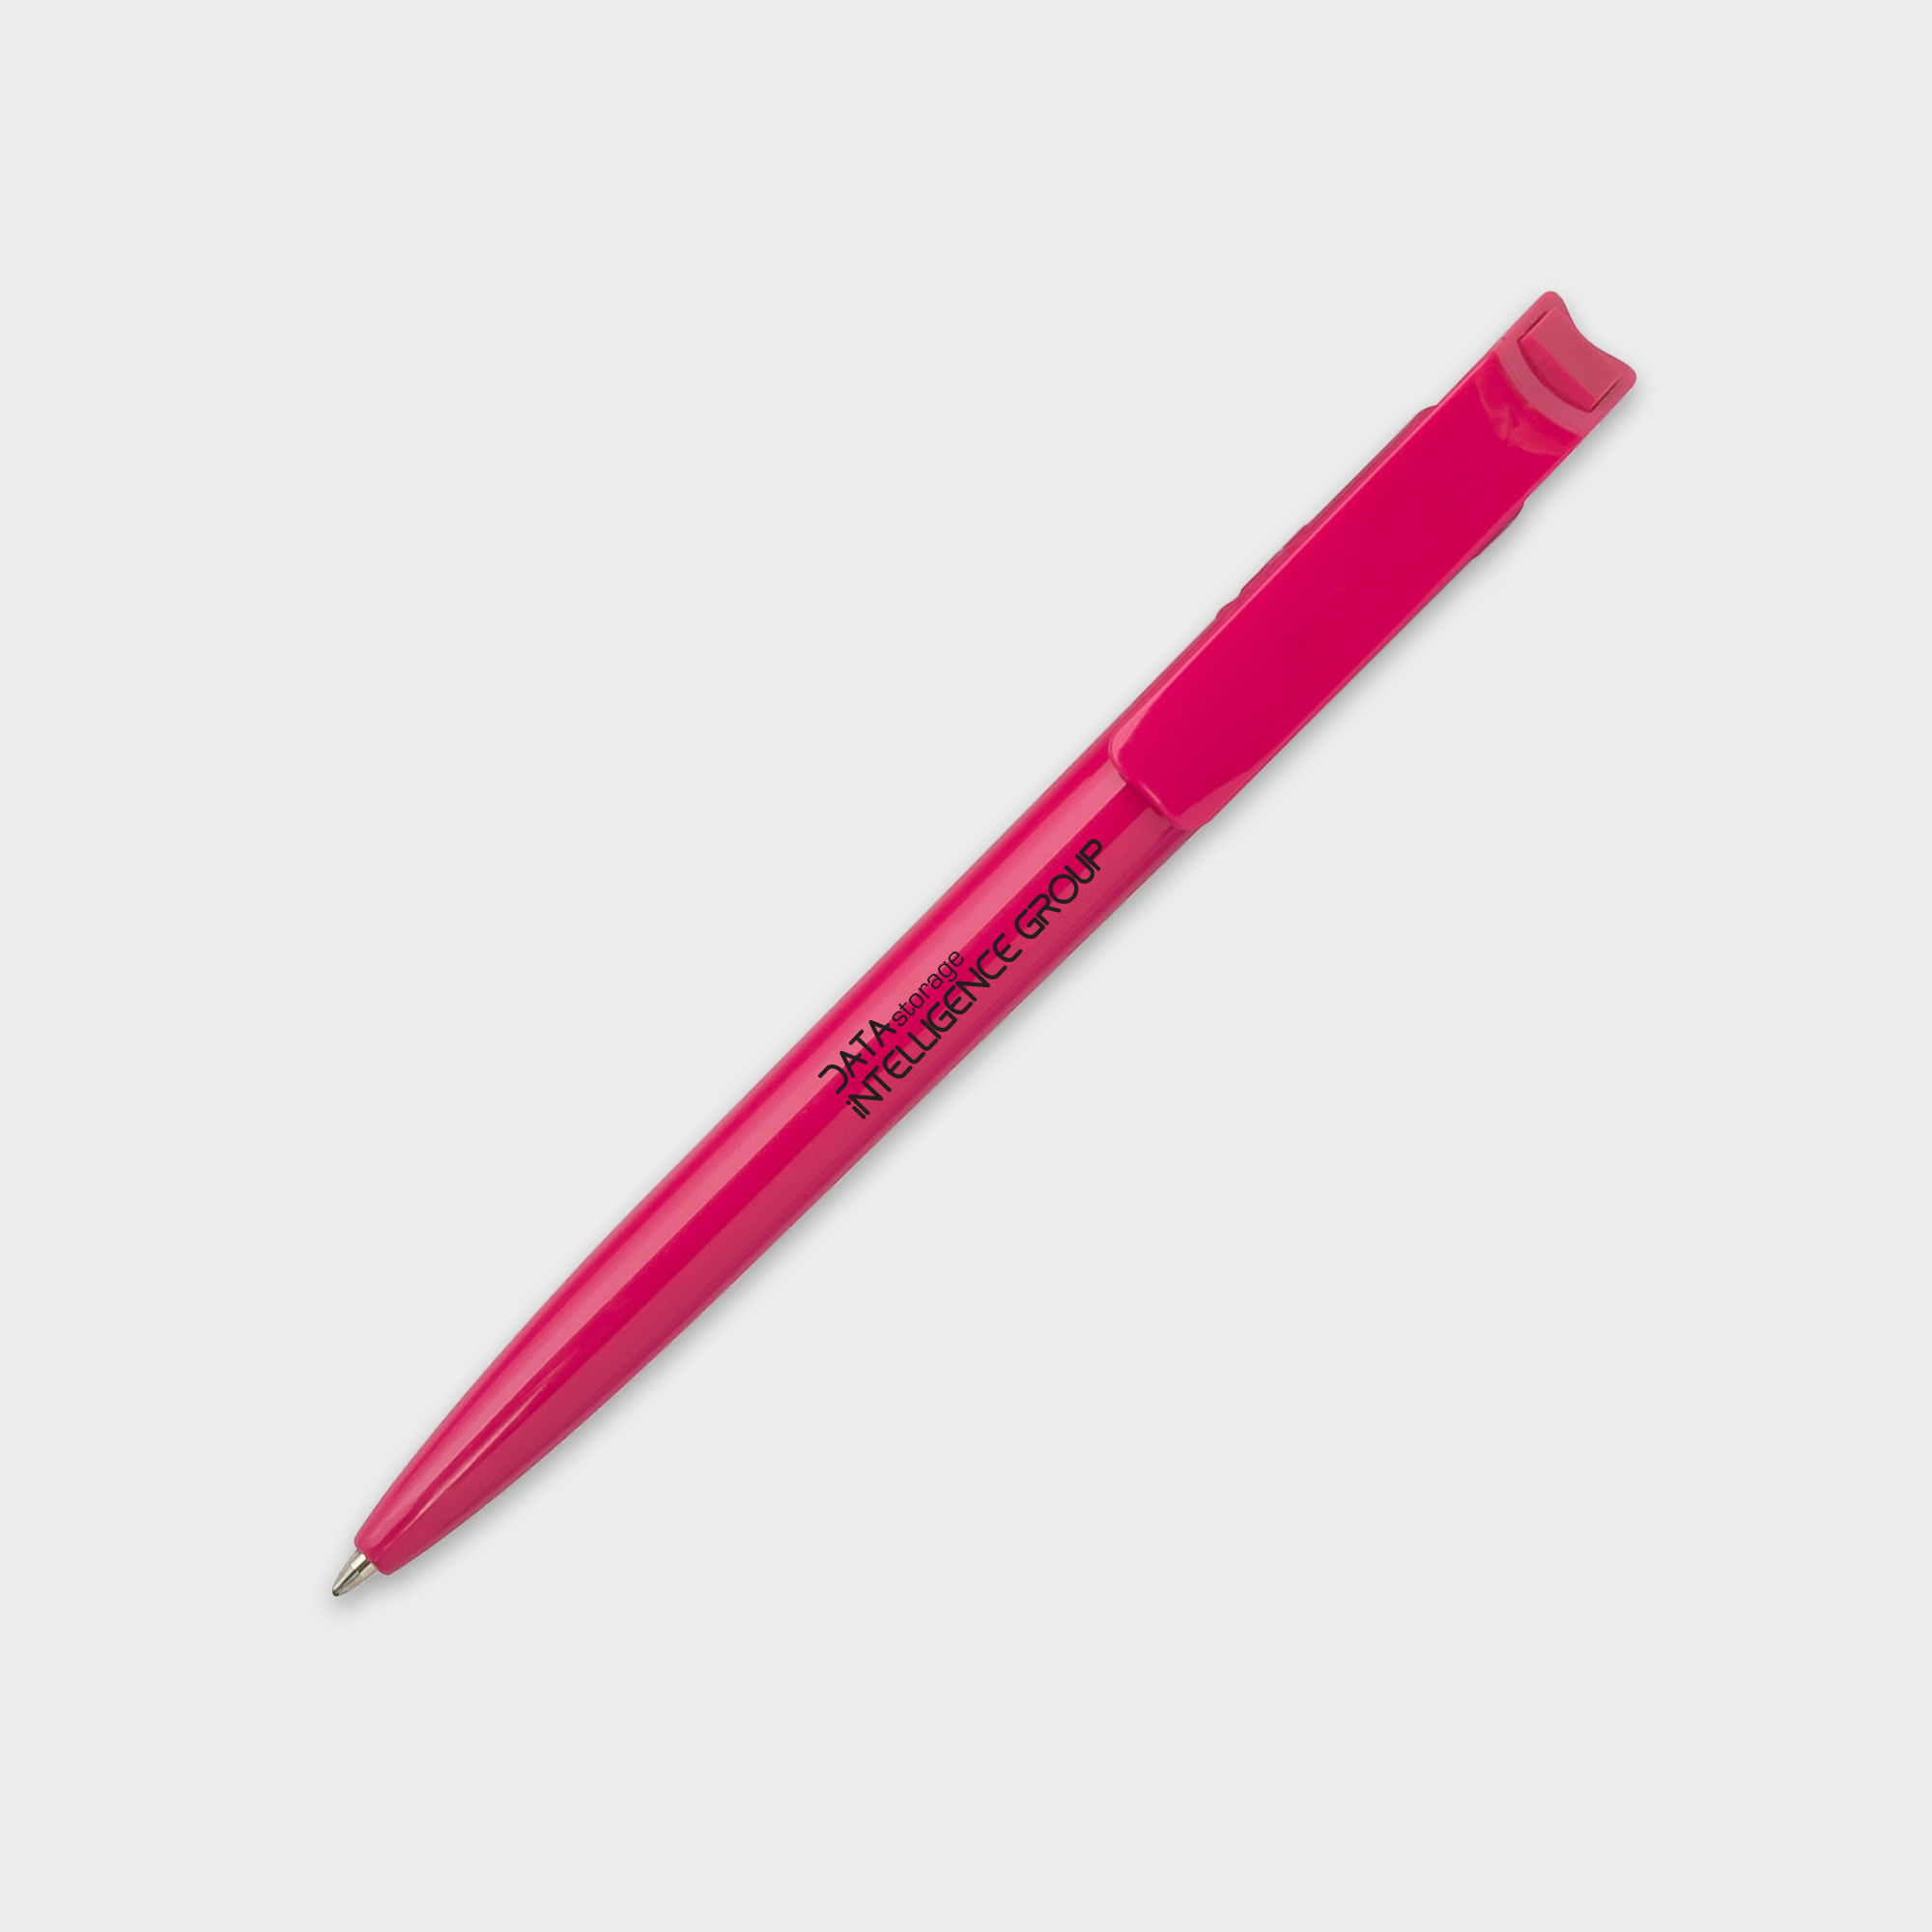 The Green & Good Litani Pen. An eco-friendly and high-quality pen made from recycled plastic bottles (rPET) with black ink refills and a solid colour body. Made in the EU and available in a variety of colours. Pink